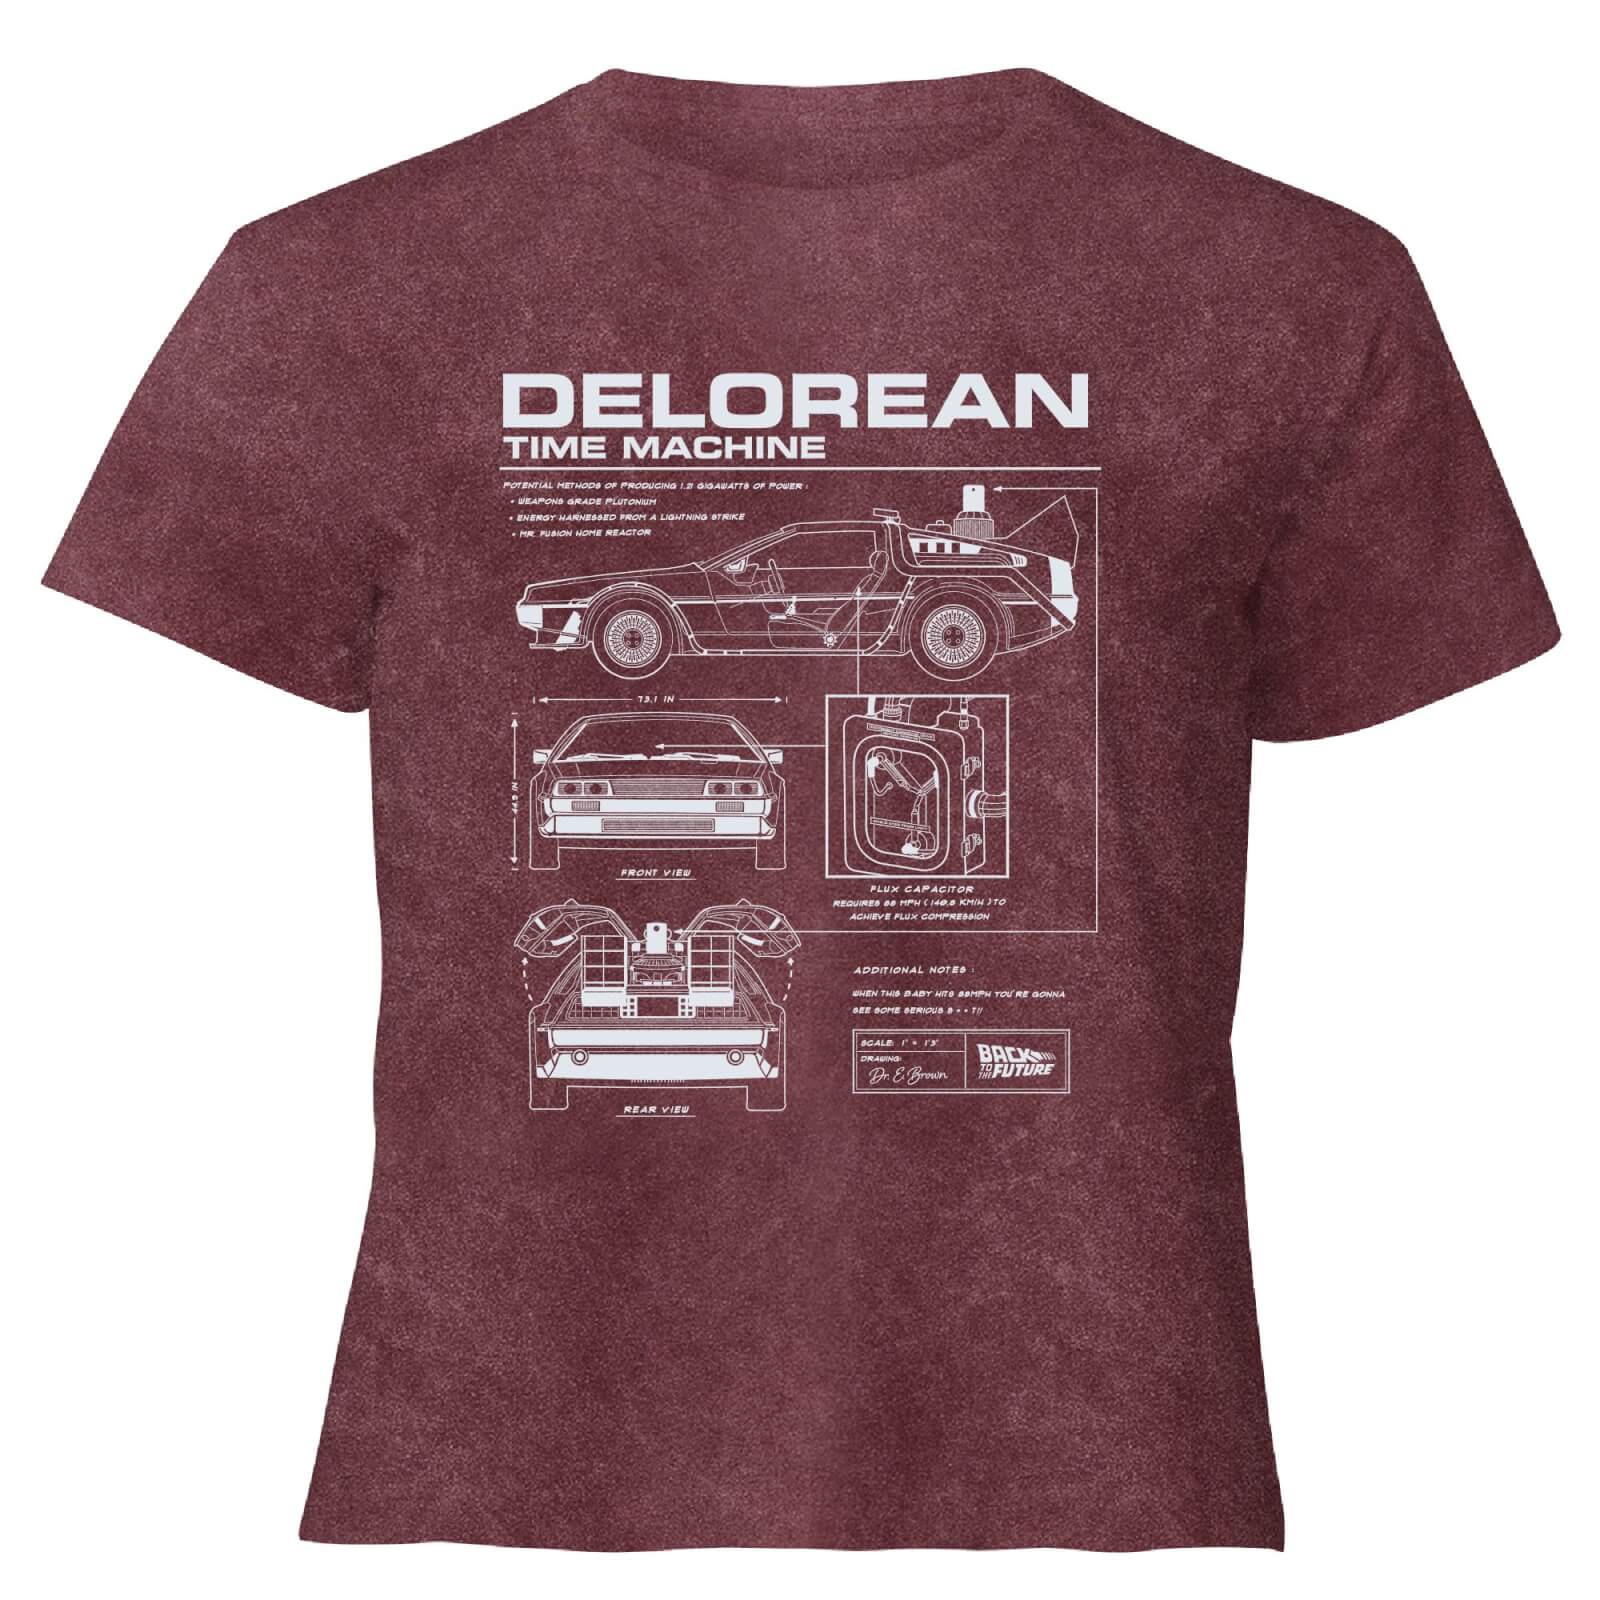 Back To The Future Delorean - Women's Cropped T-Shirt - Burgundy Acid Wash - XS